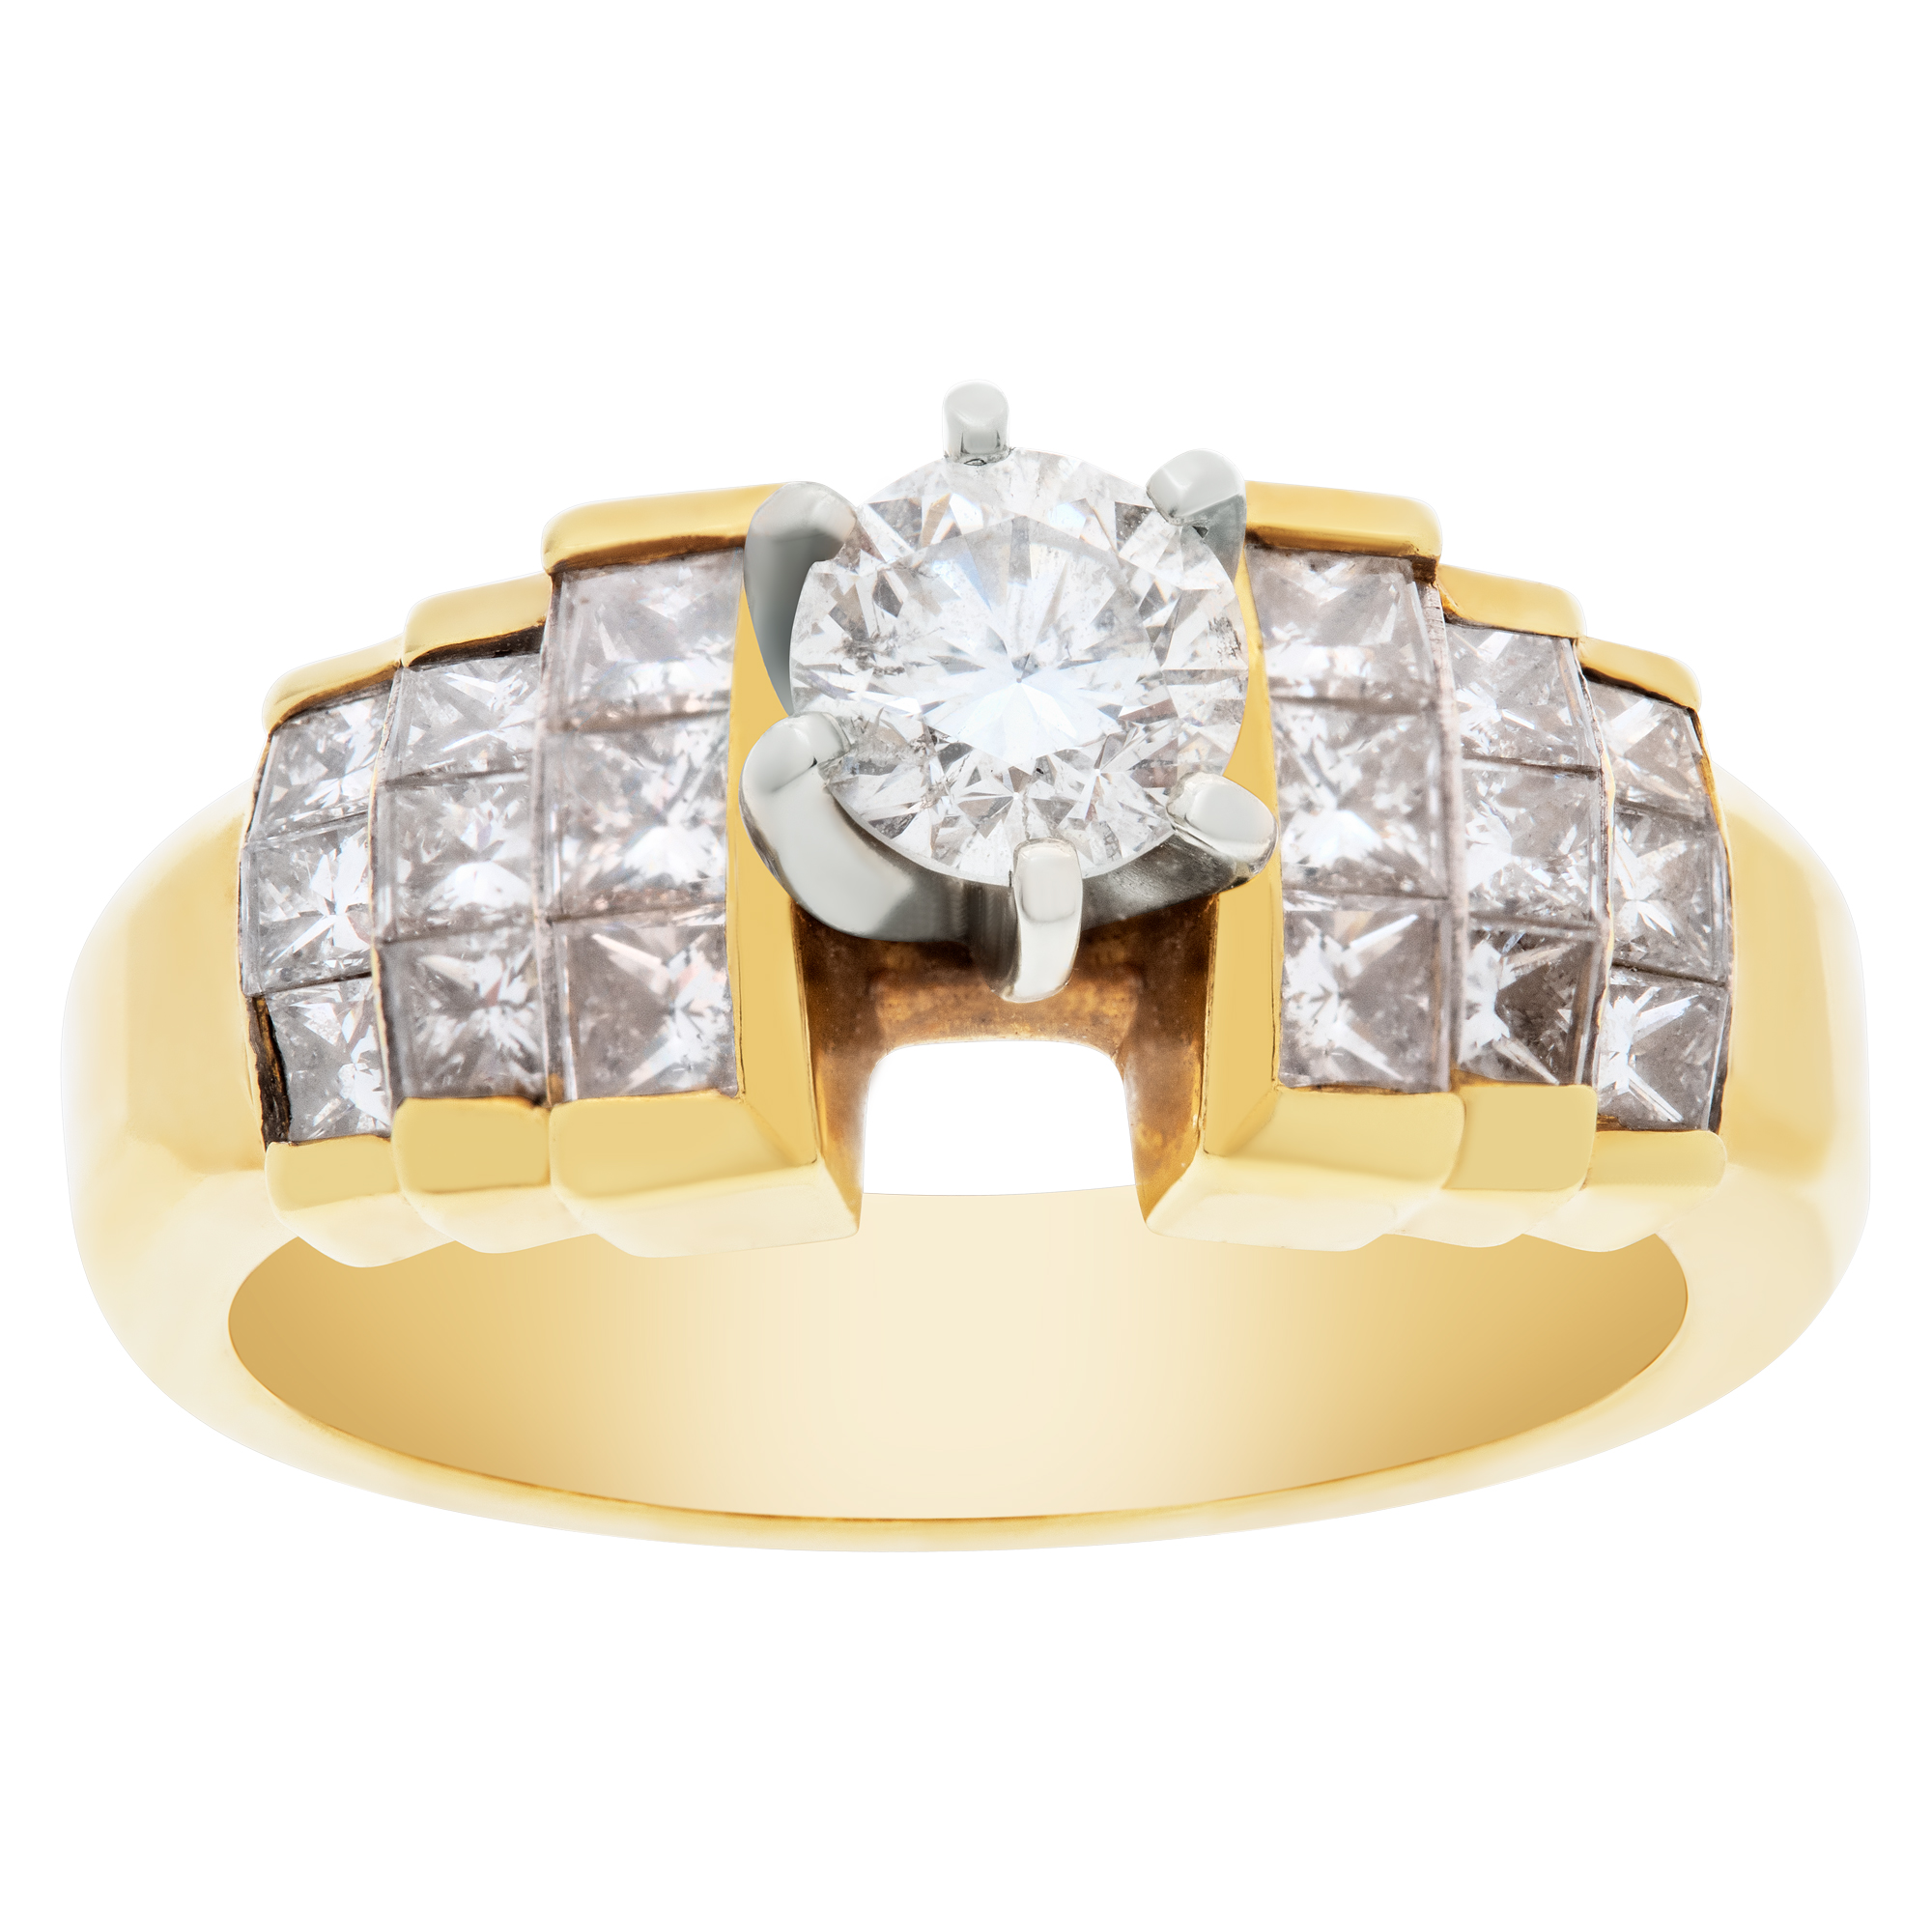 Diamond engagement ring in 18k yellow gold with 0.45 carat center diamond (G-H color, SI-I clarity) image 1